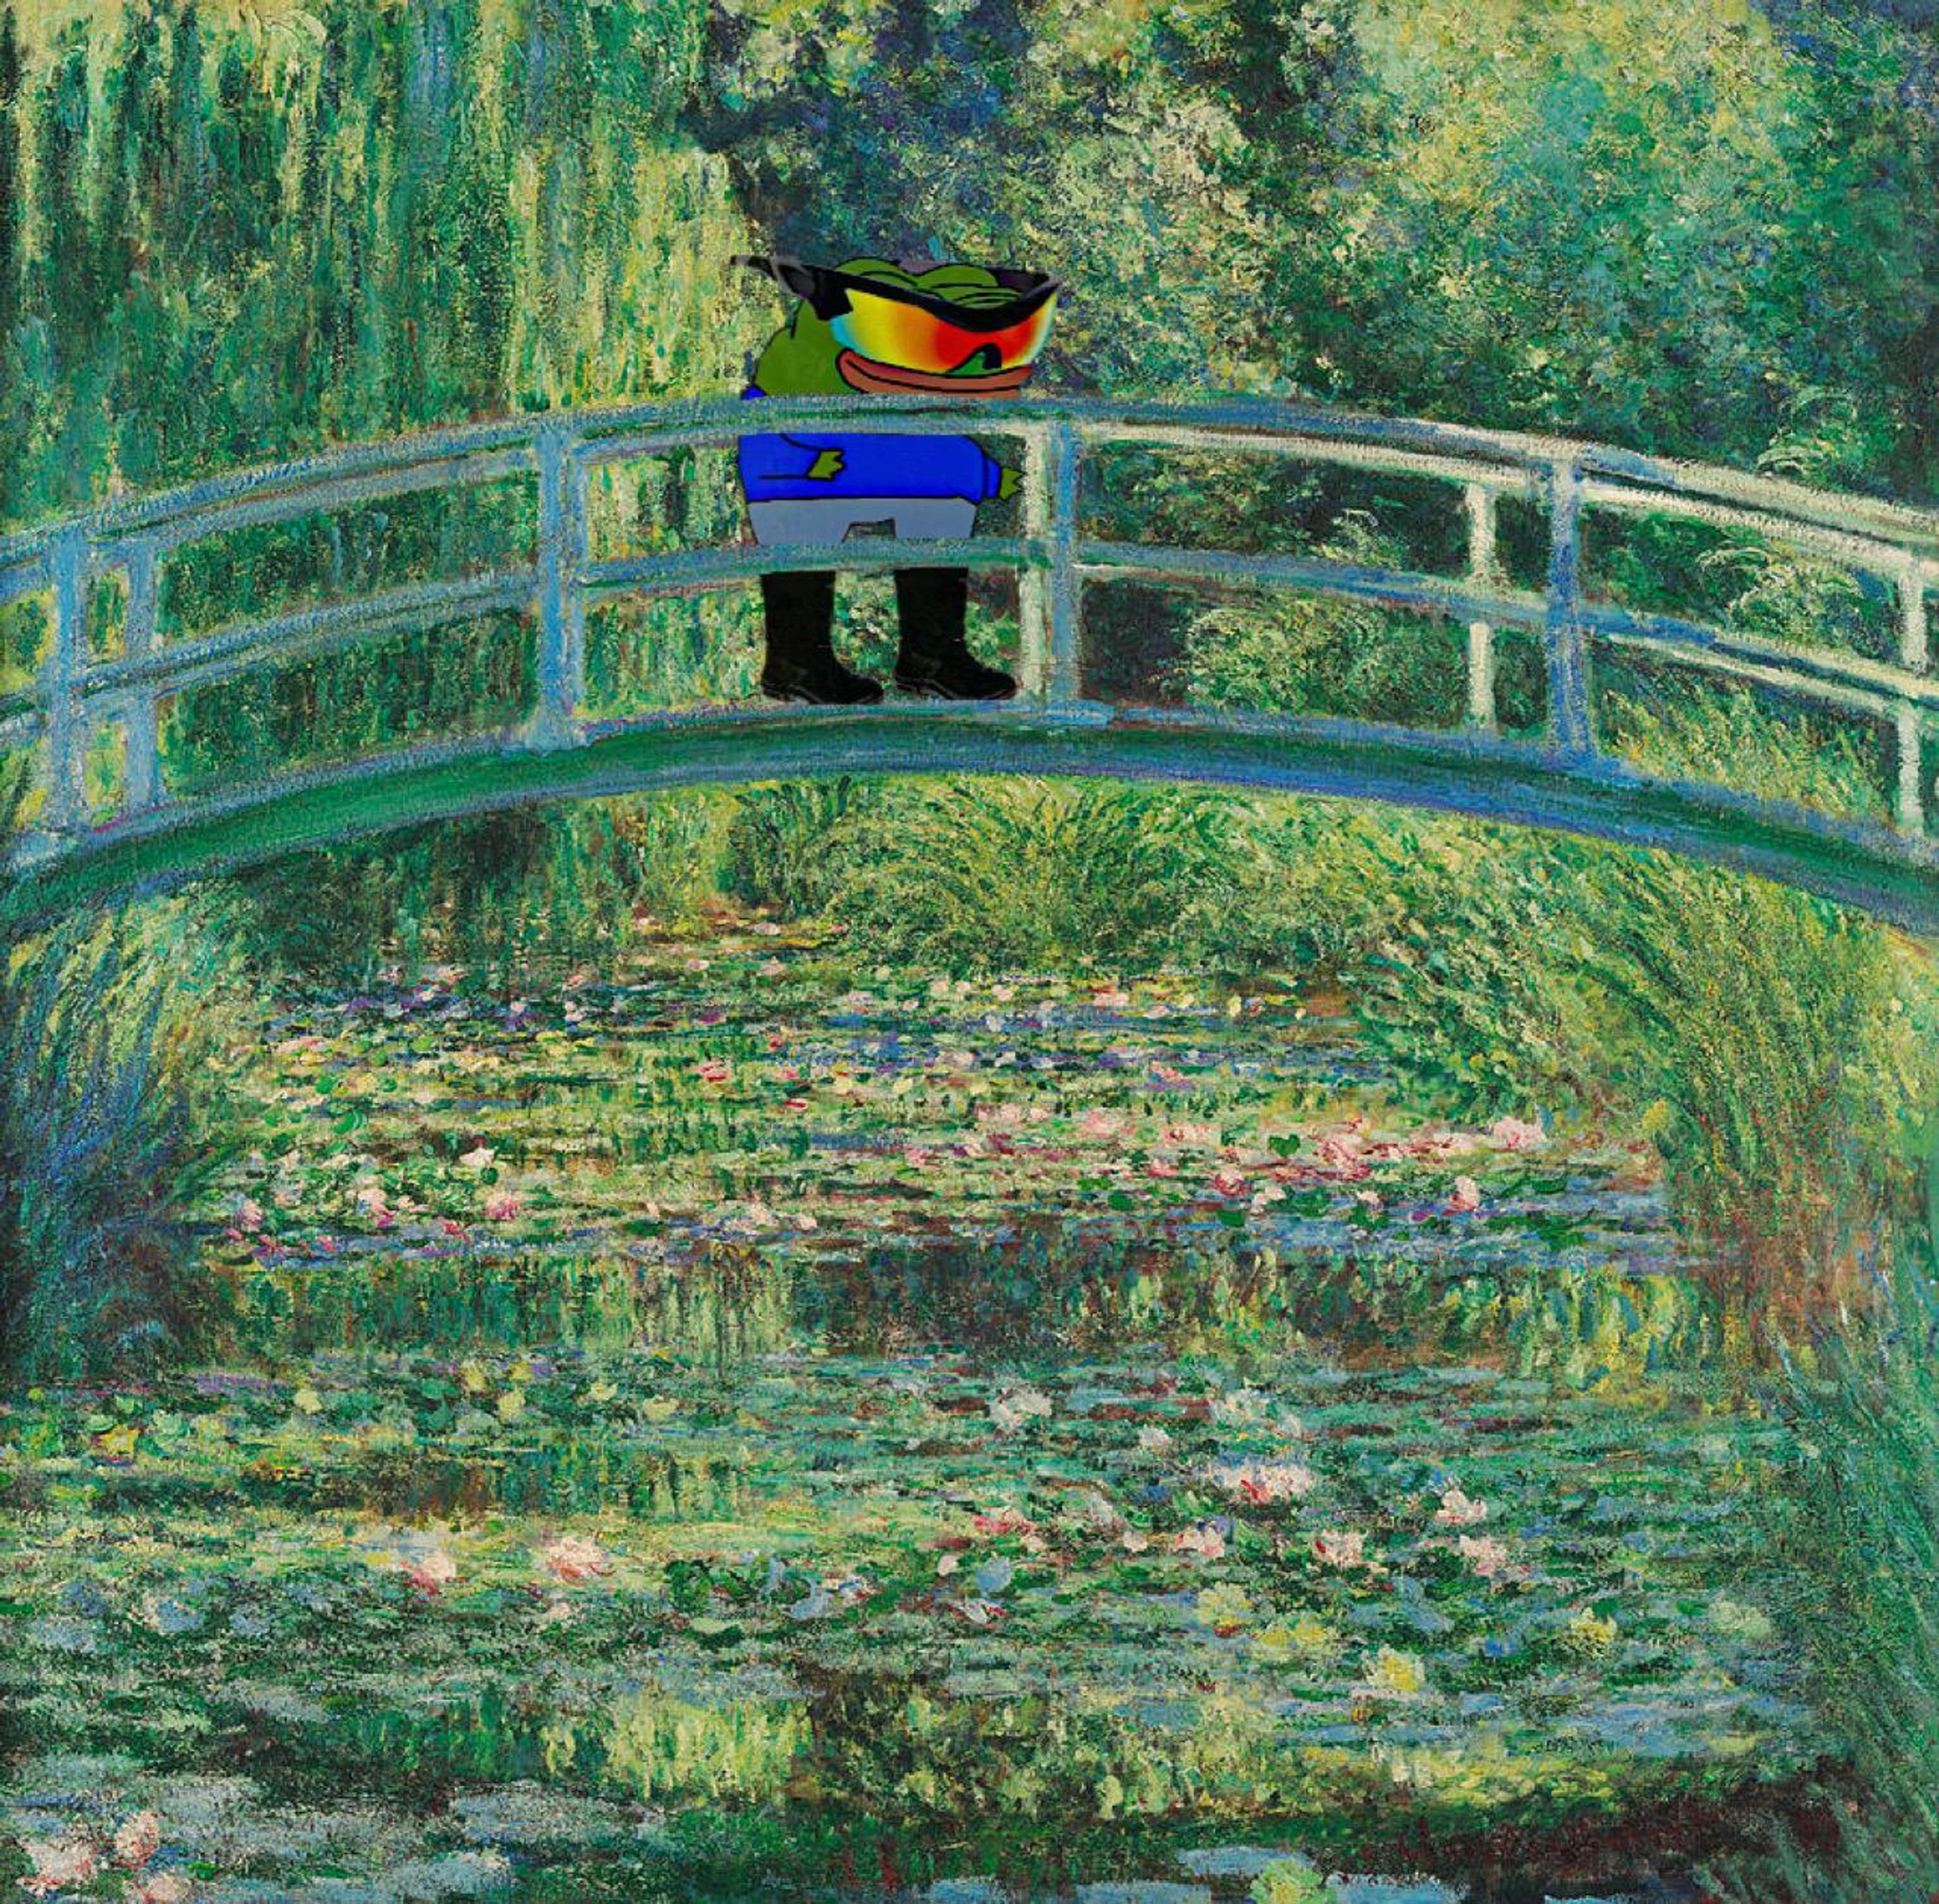 "Don't speak to me about "Claude Monet," worm, I'm a graduated art teacher. I'm not saying the jpegs or videos aren't art, I'm saying your whole system is a mere pretence of an art scene for profiteering by platforms and crypto moguls." Art by Tyom Trakhanov